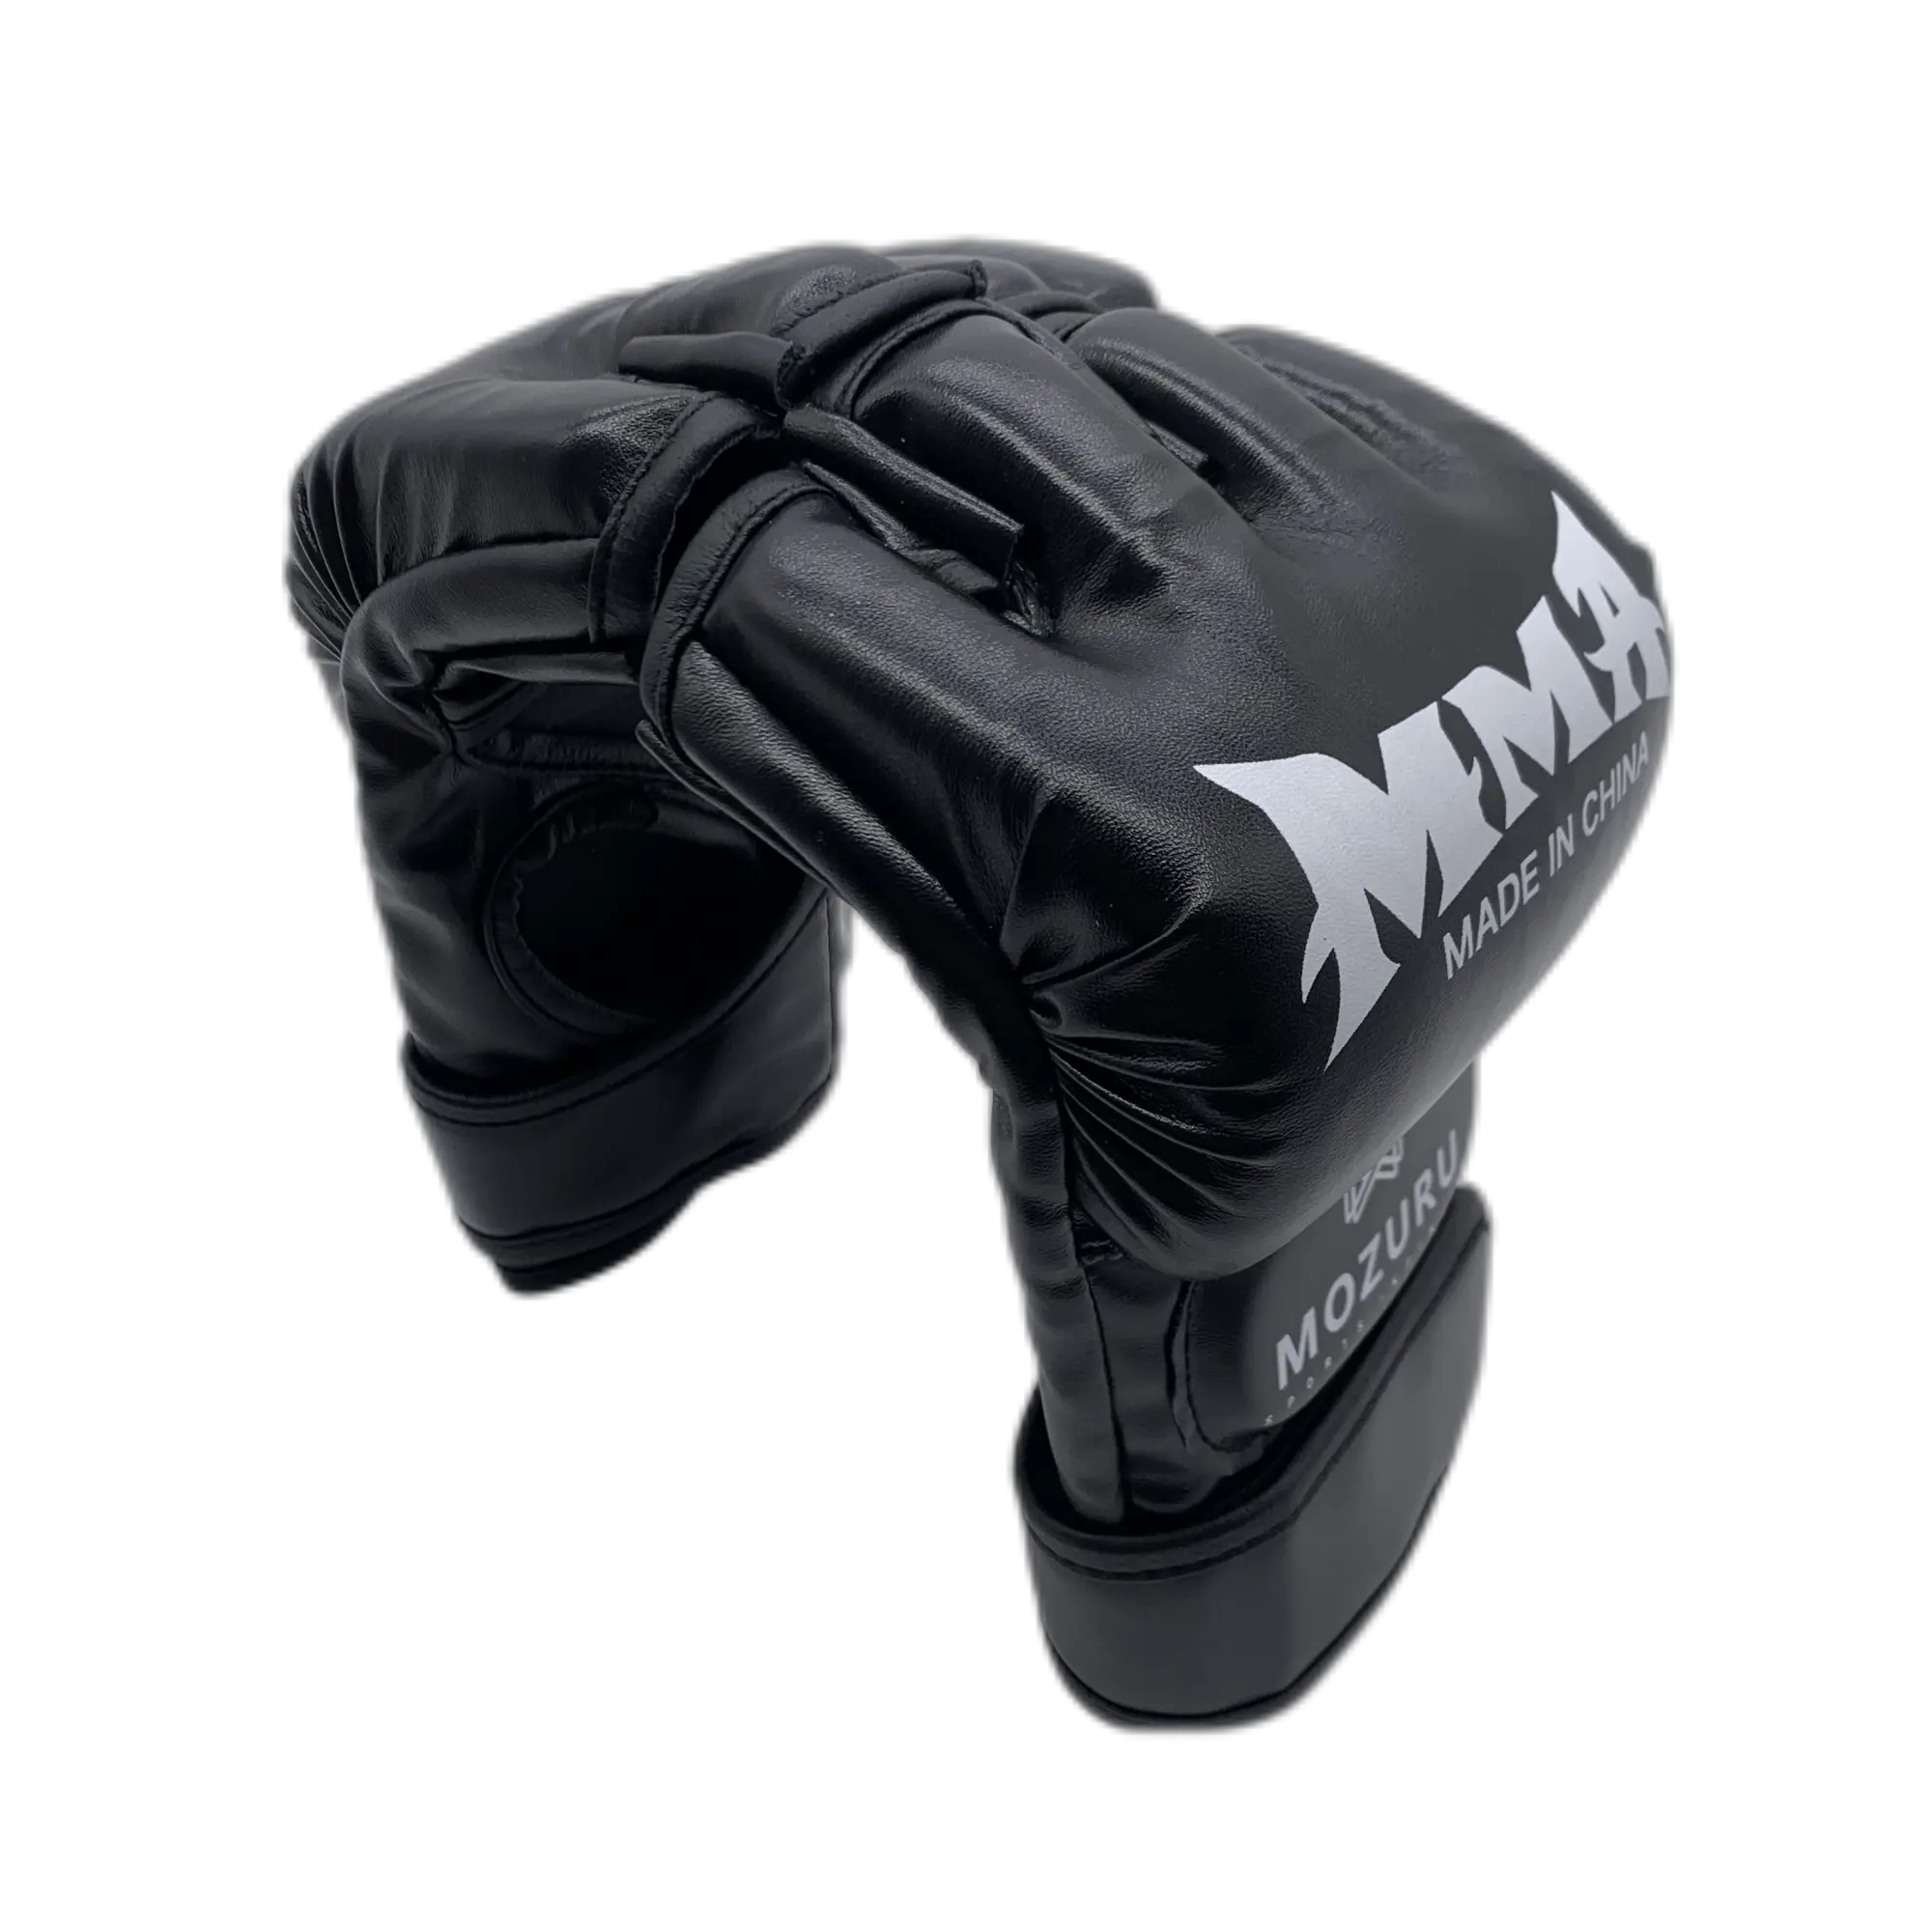 Customize Boxing Gloves Twins Boxing Training Sparring Gloves And Pads Set